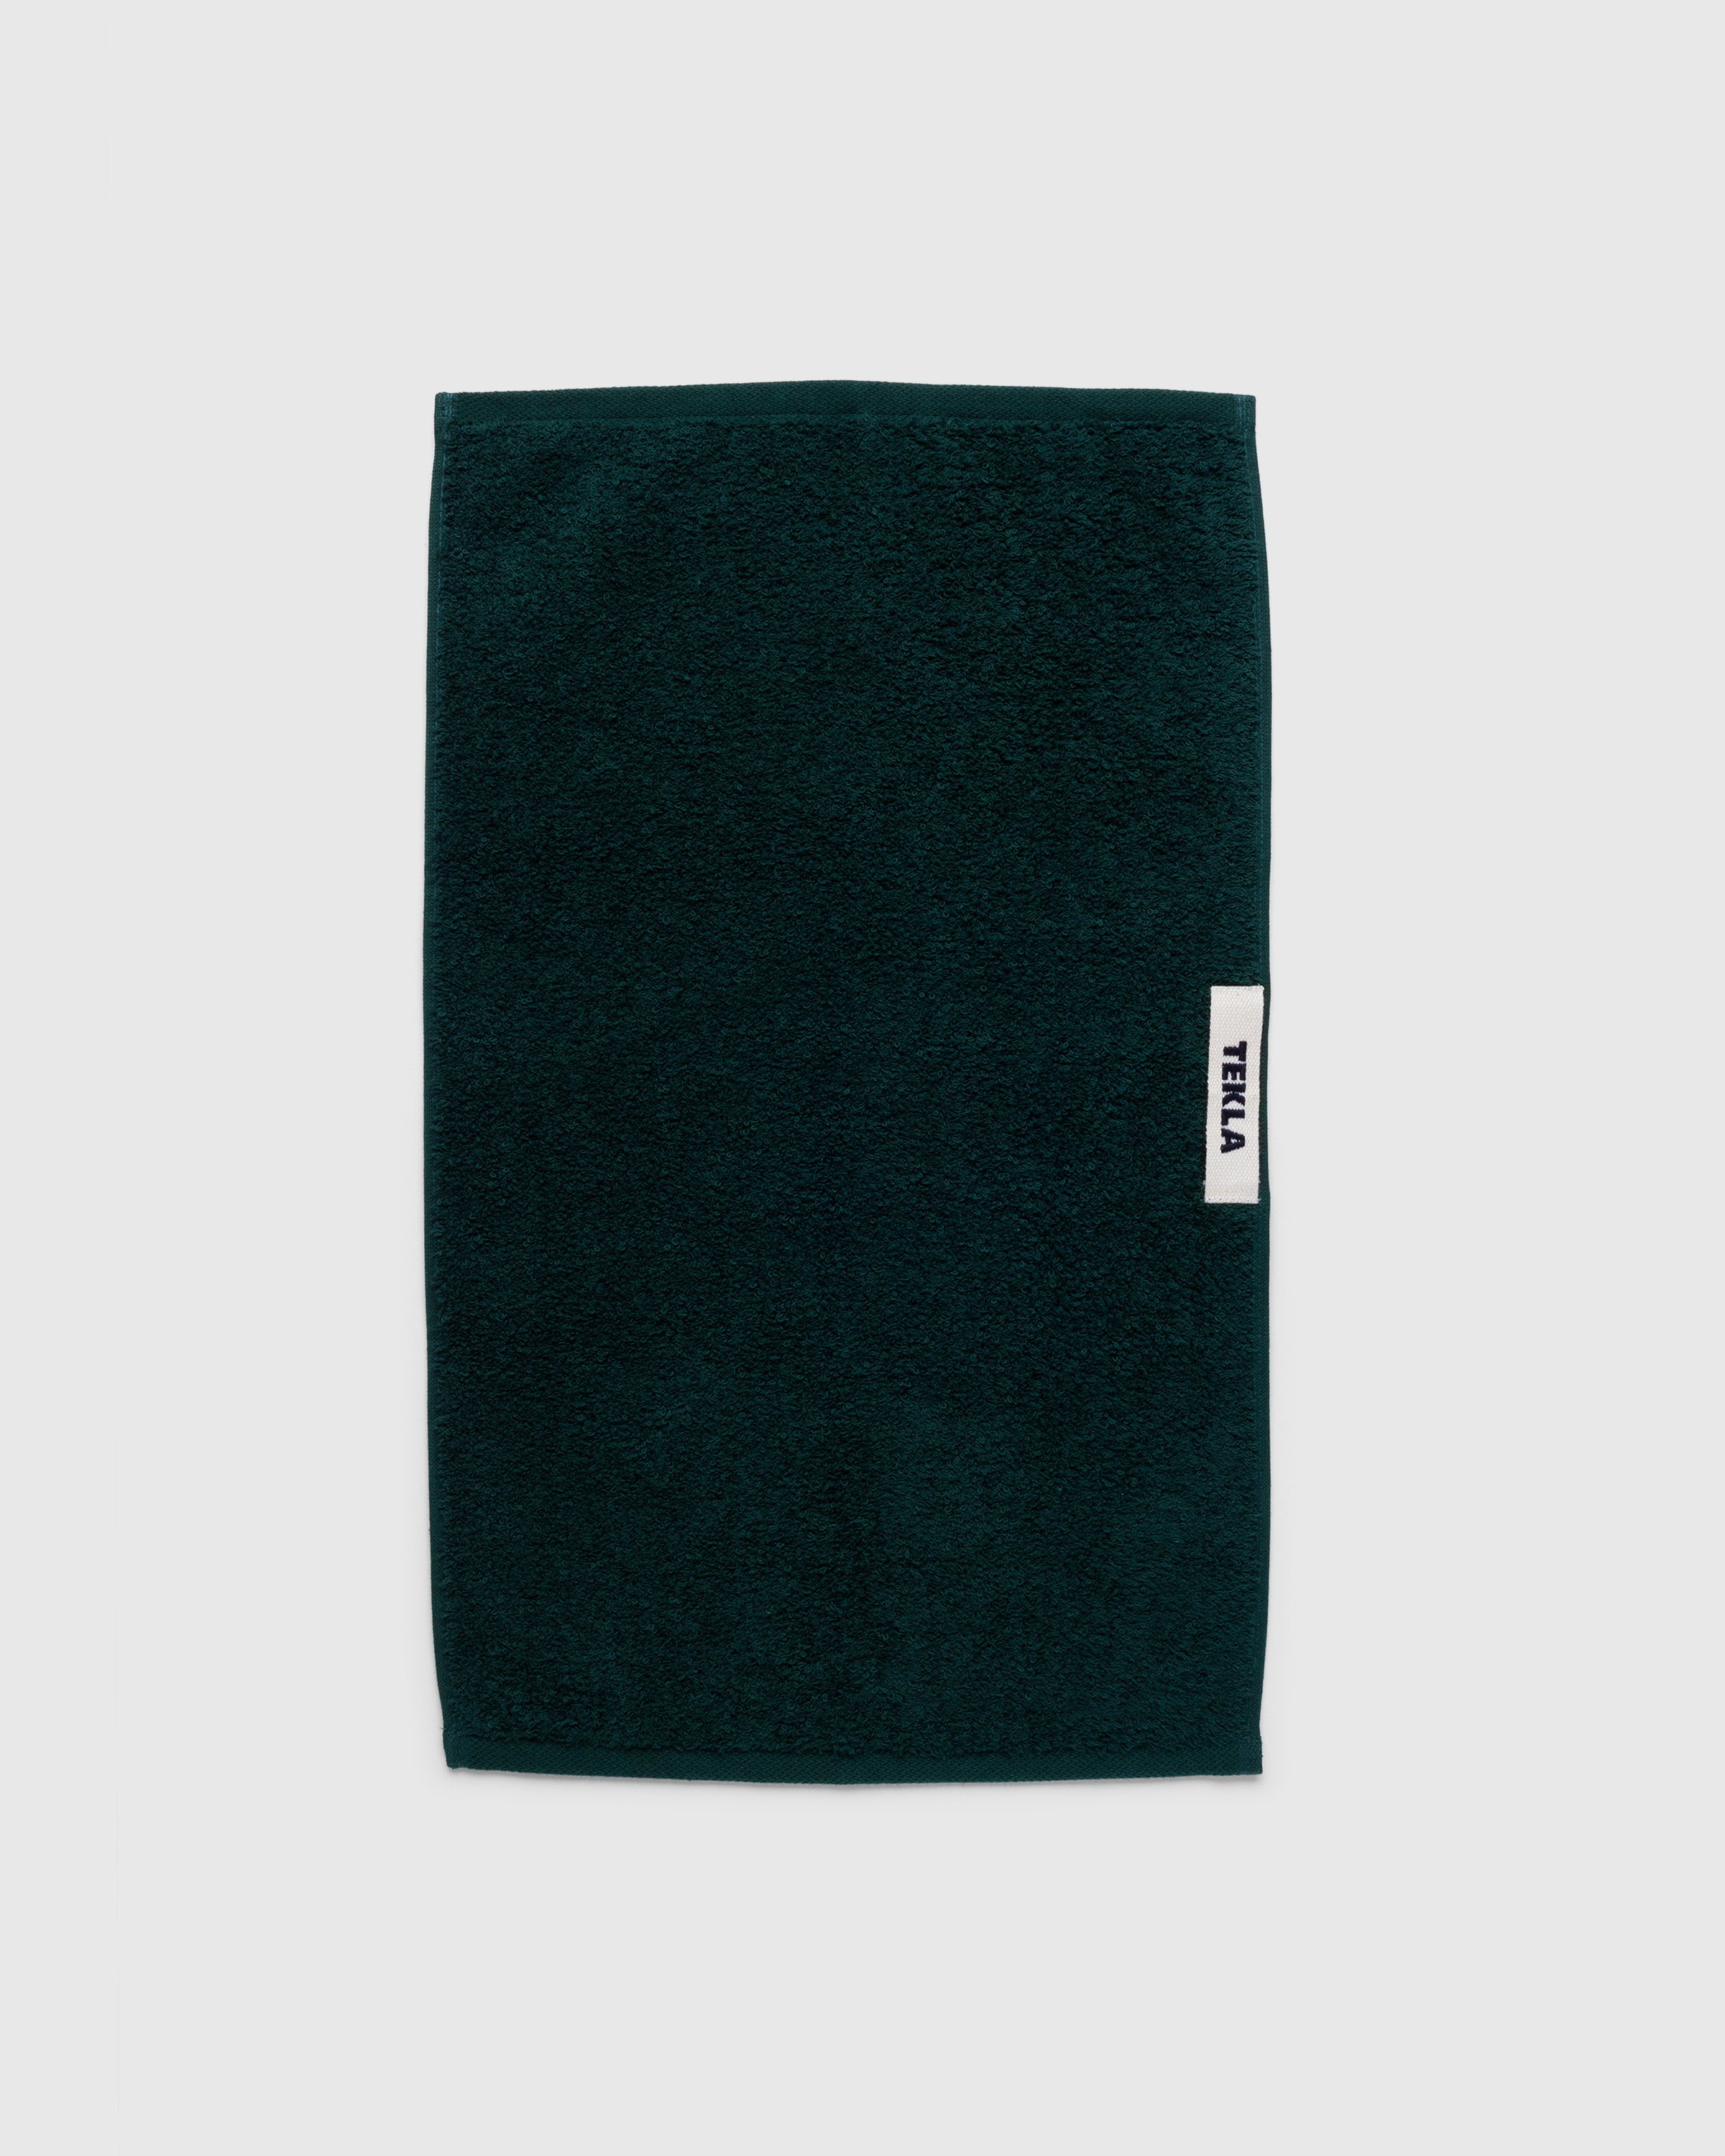 Tekla - Guest Towel Forest Green - Lifestyle - Green - Image 2